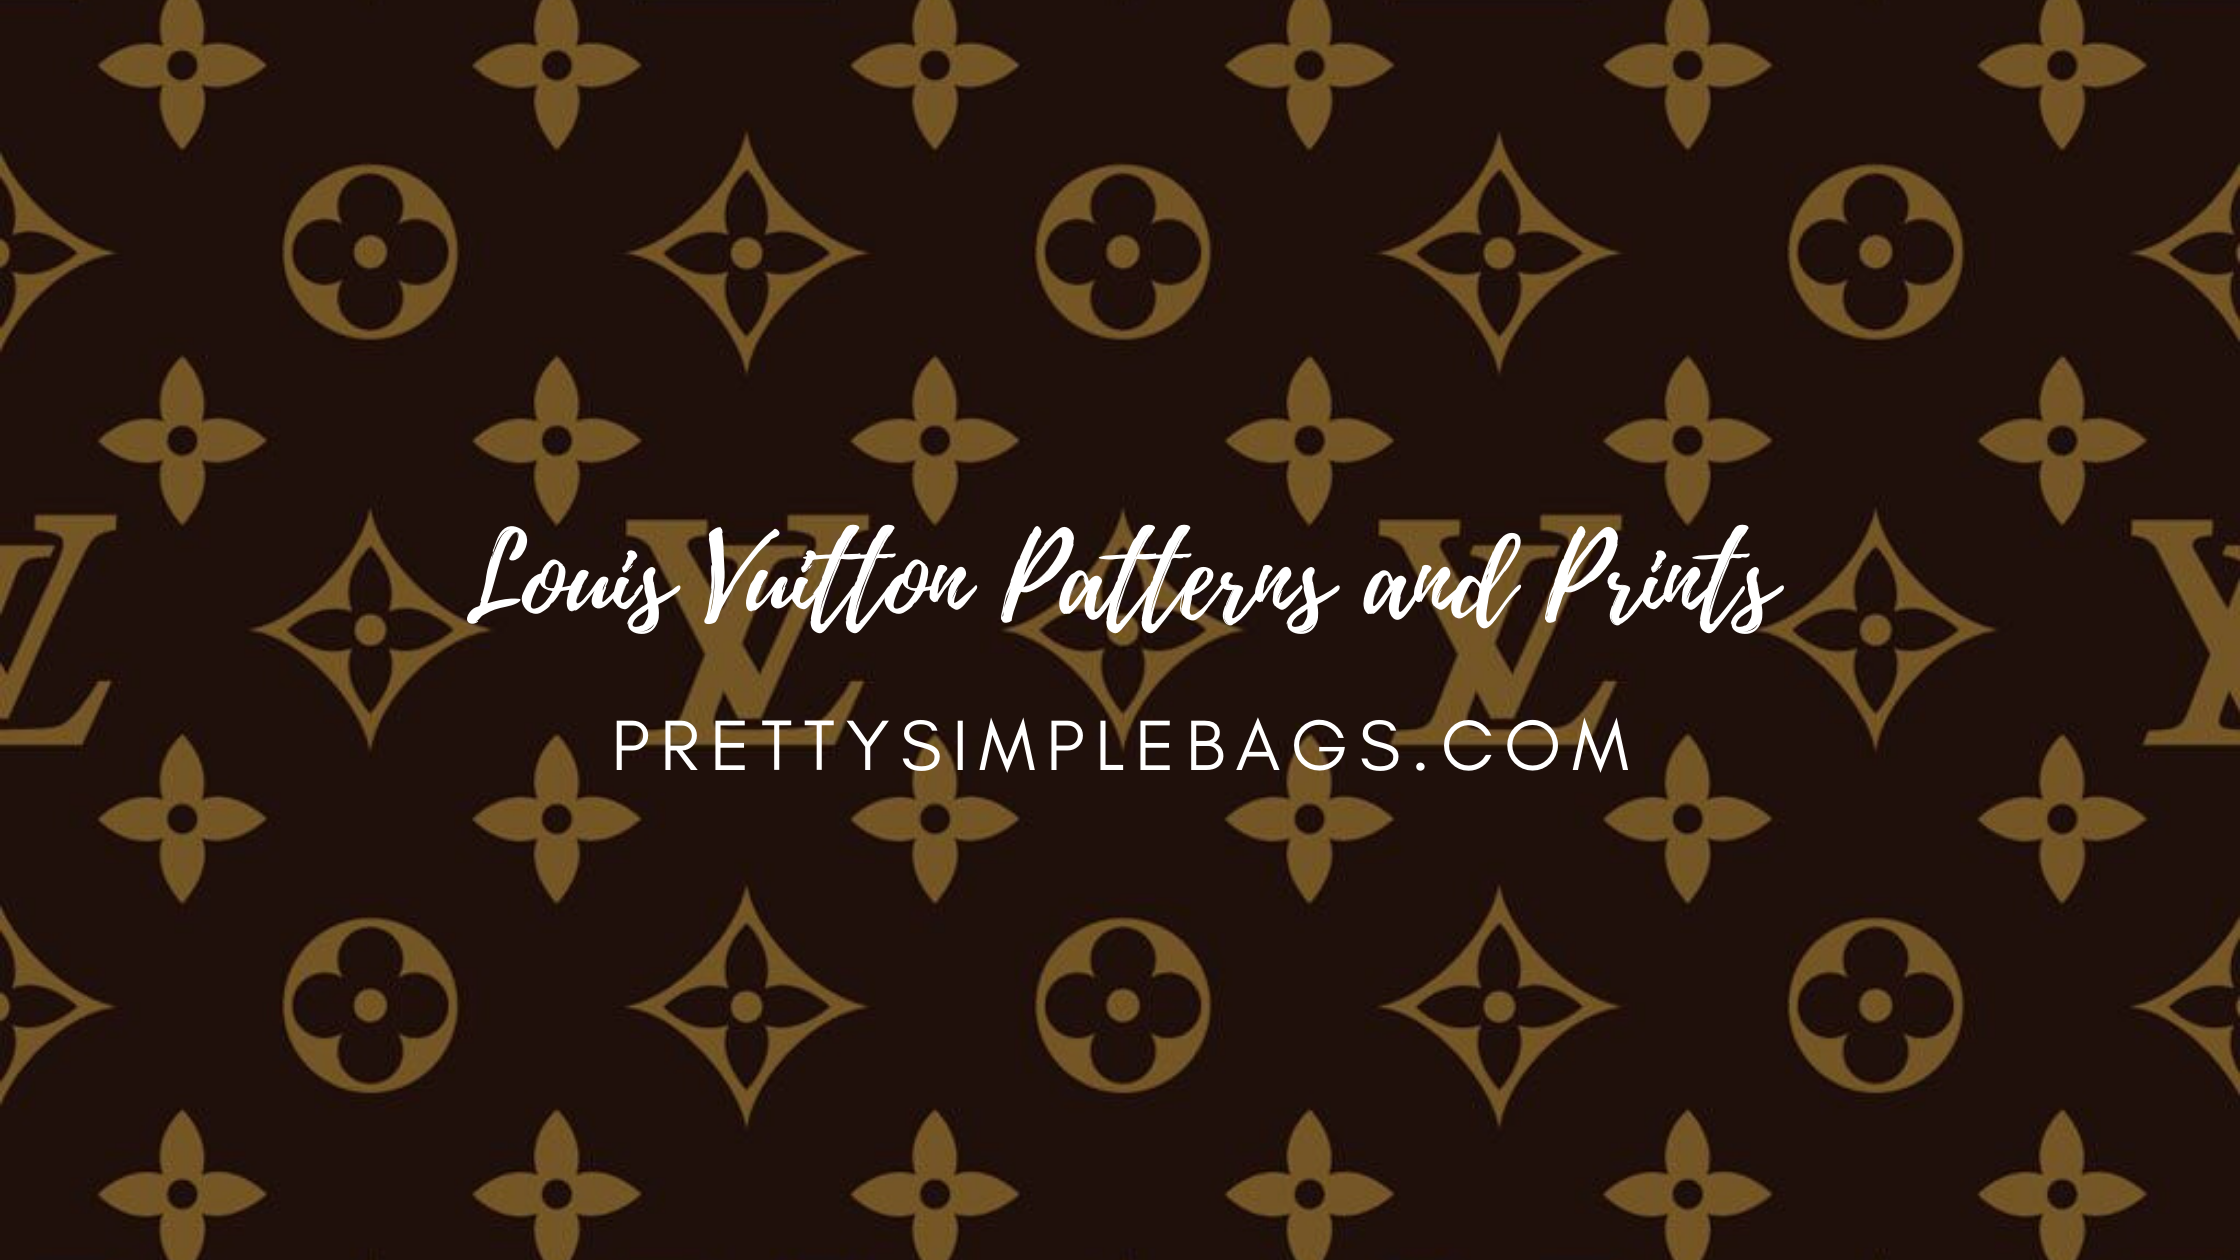 Essential Information on Louis Vuitton Patterns and Prints plus